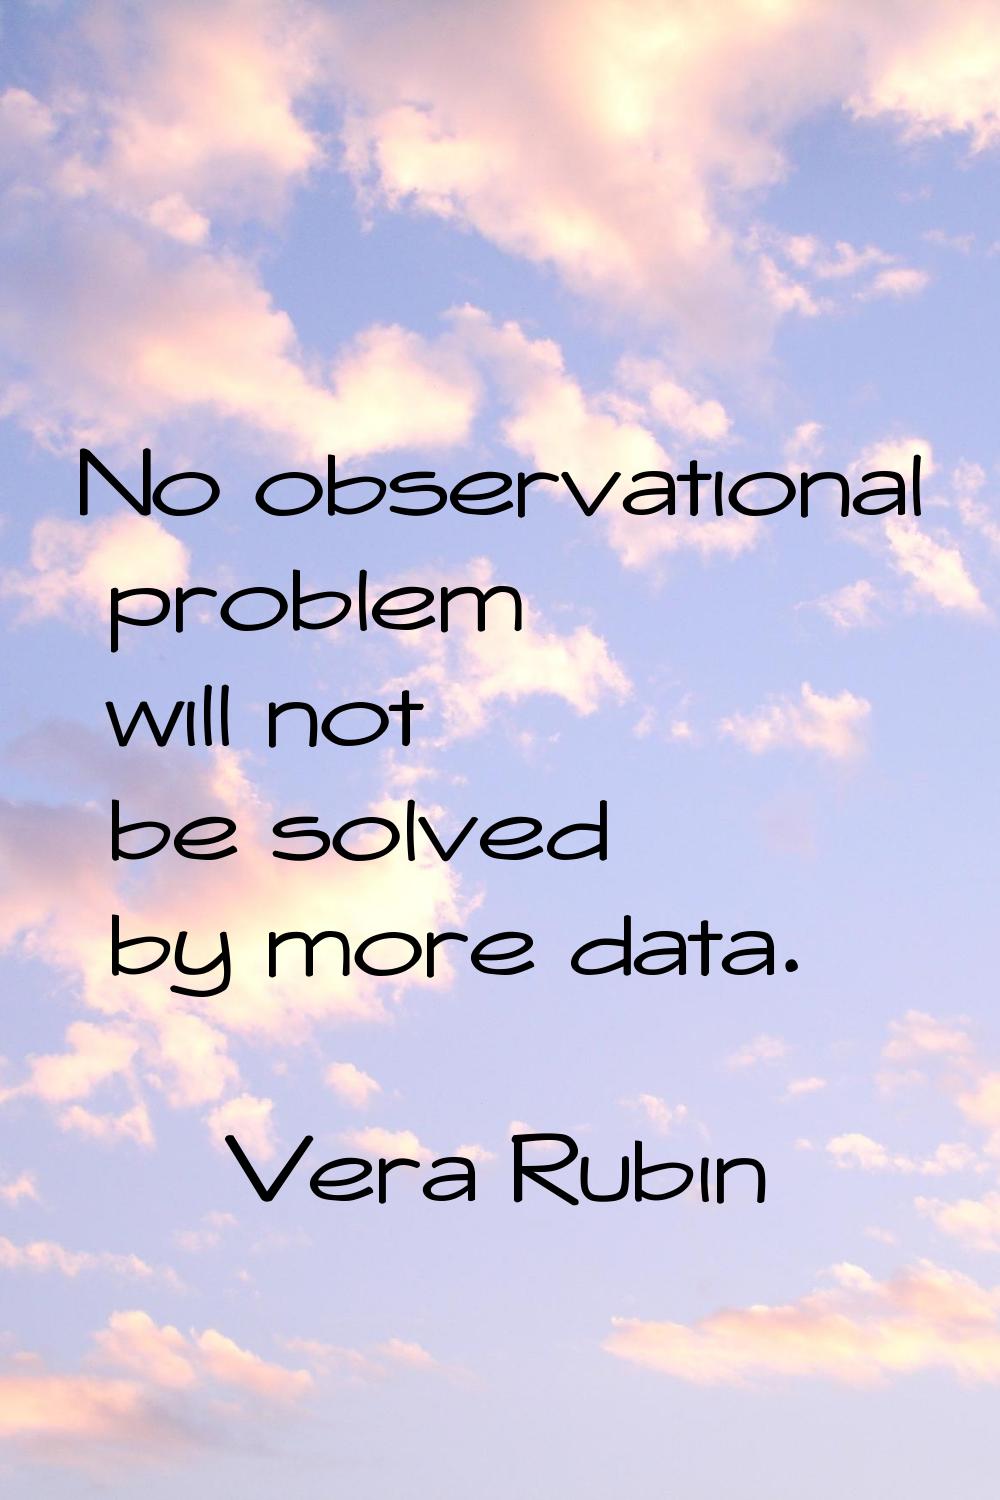 No observational problem will not be solved by more data.